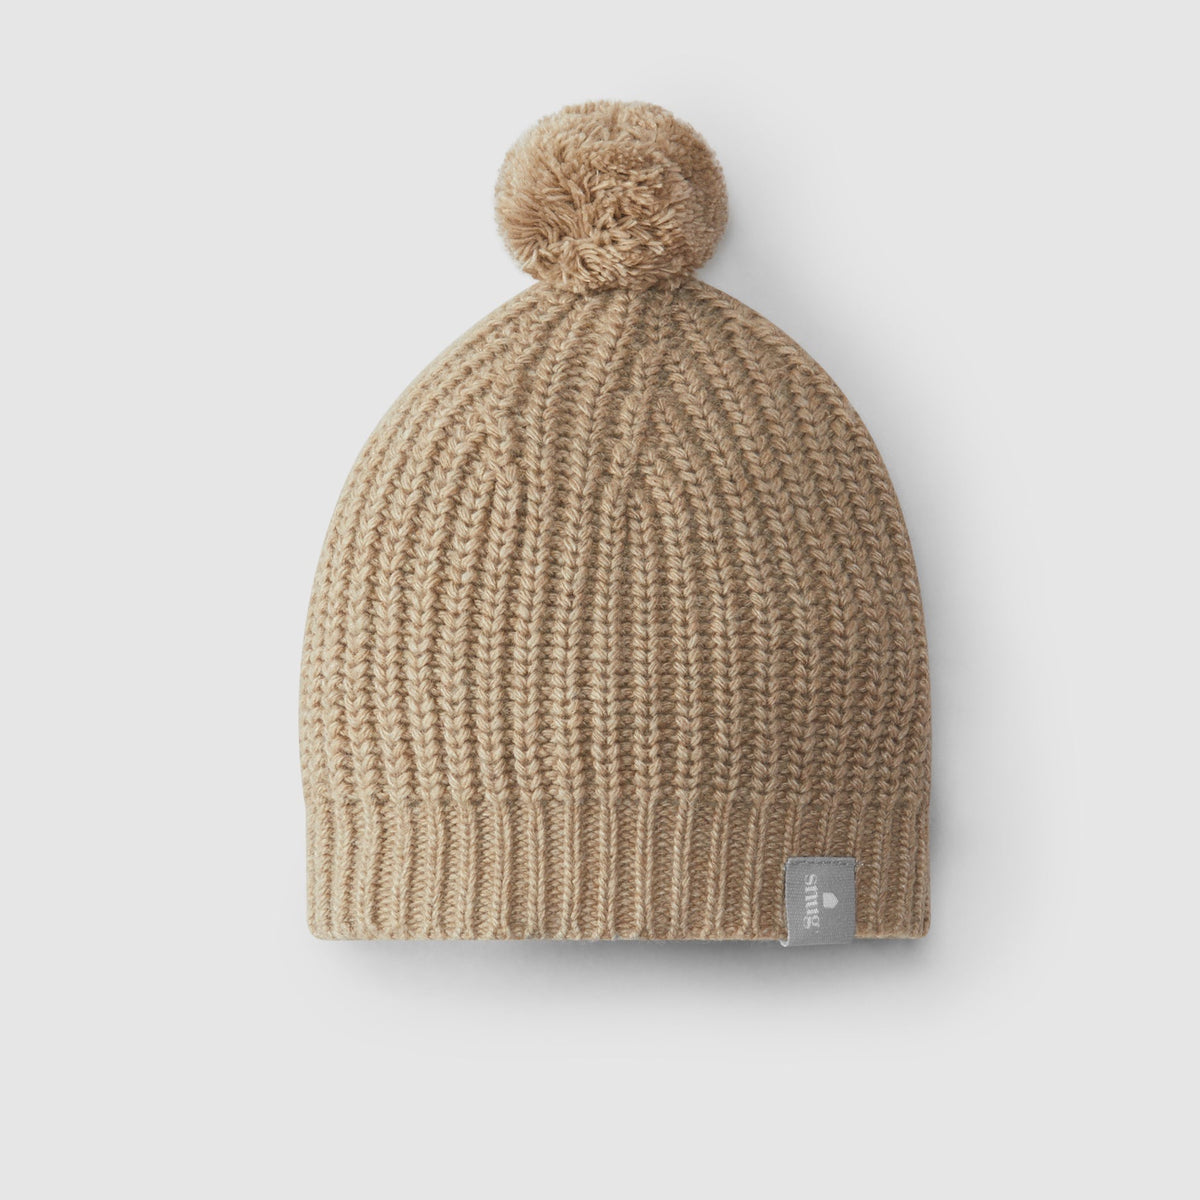 Knitted Hat with Pom-Pom